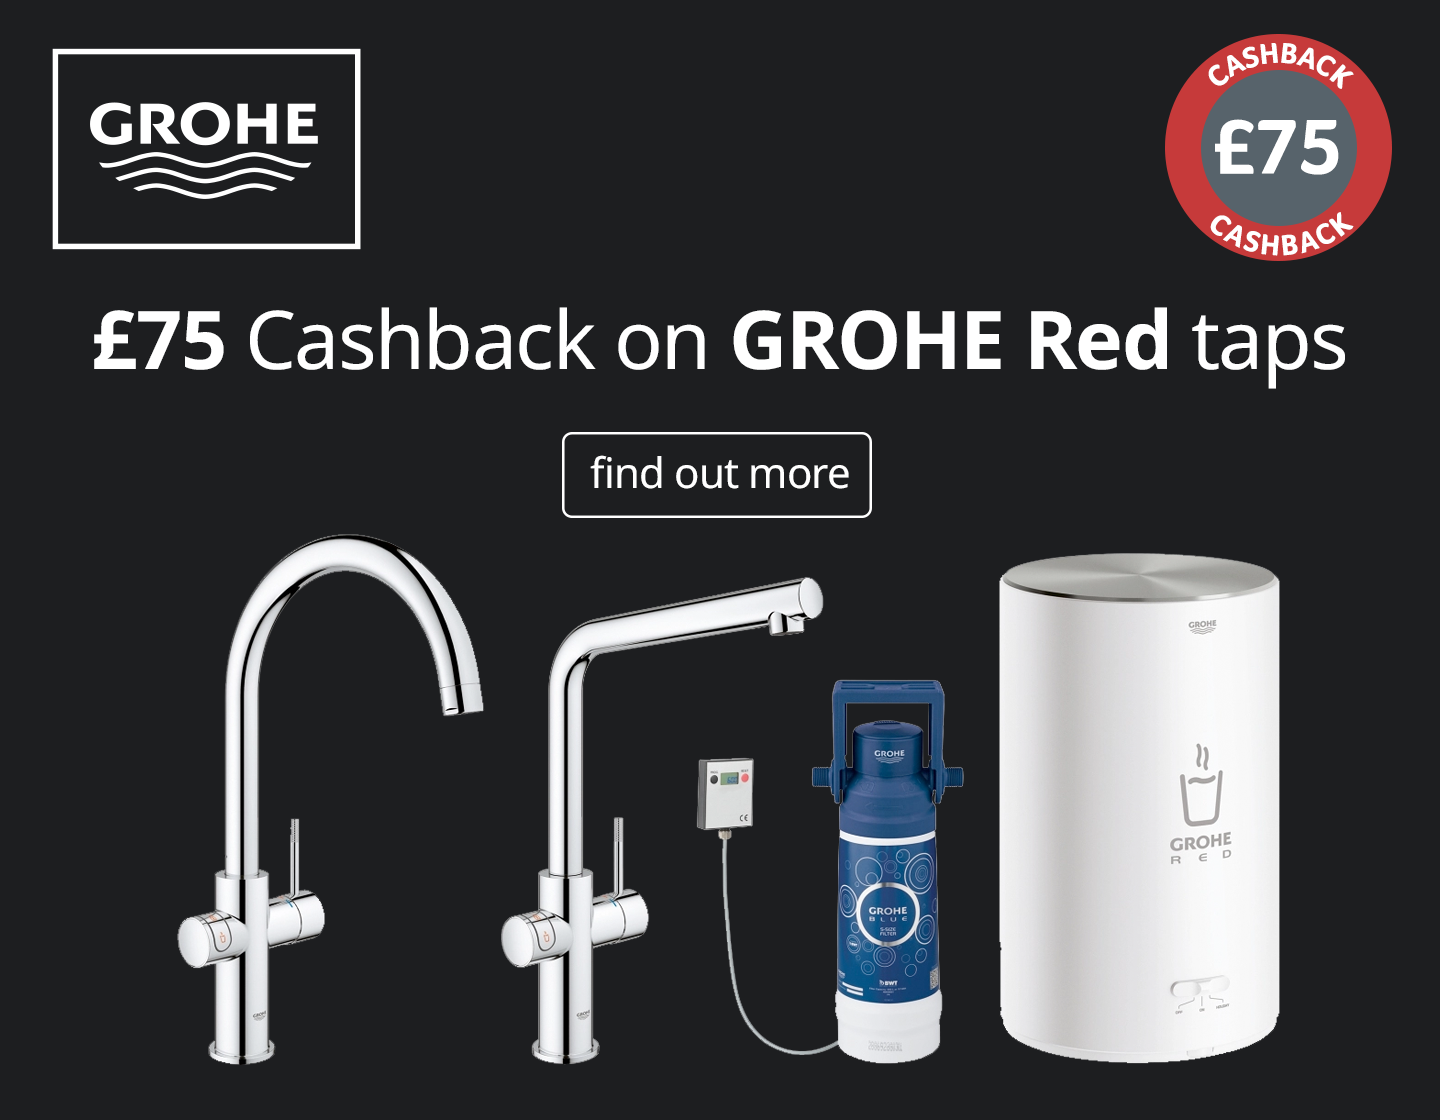 Grohe-Red-Promo-1440x1120px